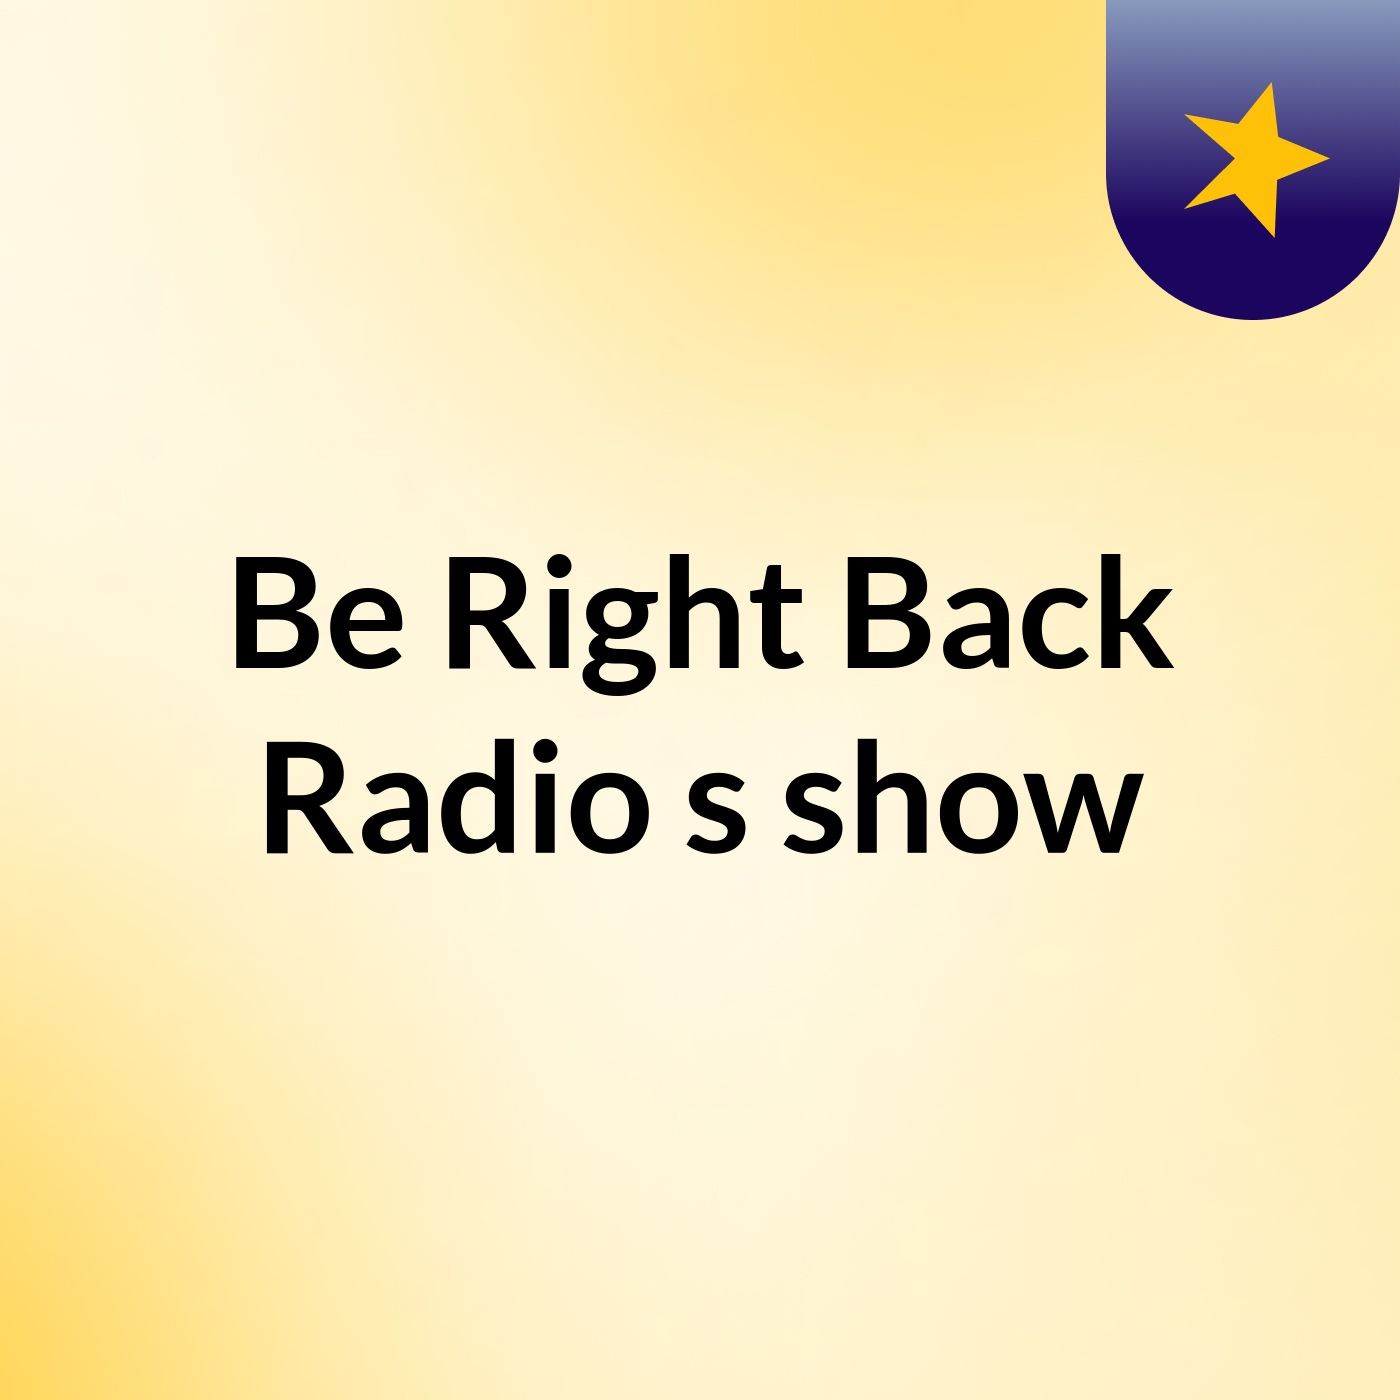 Be Right Back Radio's show